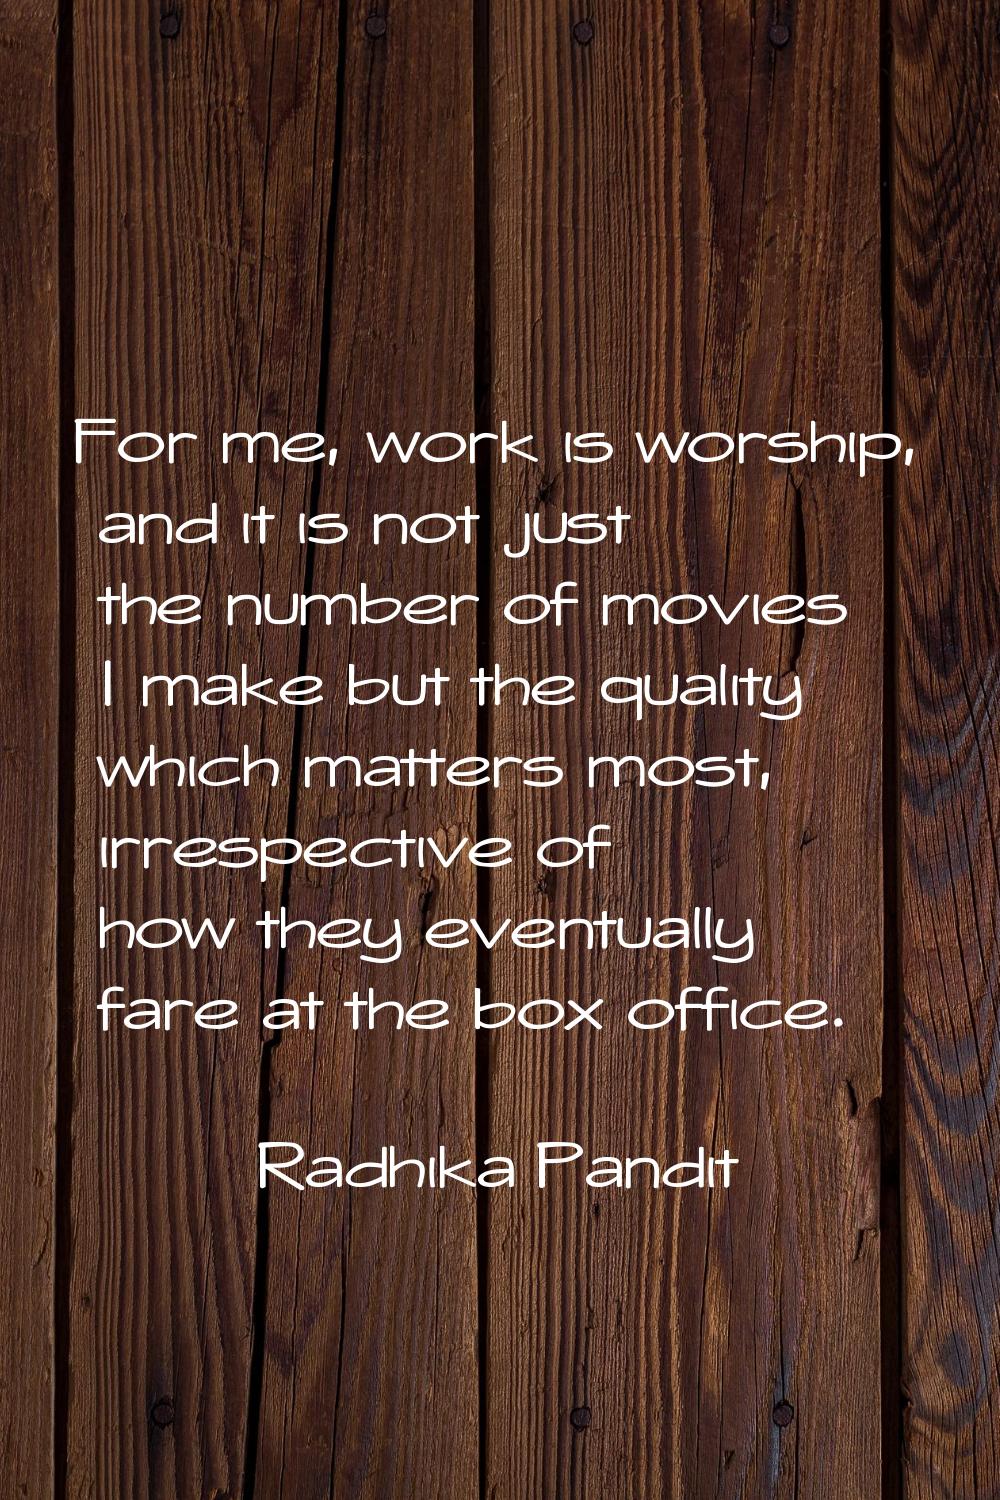 For me, work is worship, and it is not just the number of movies I make but the quality which matte